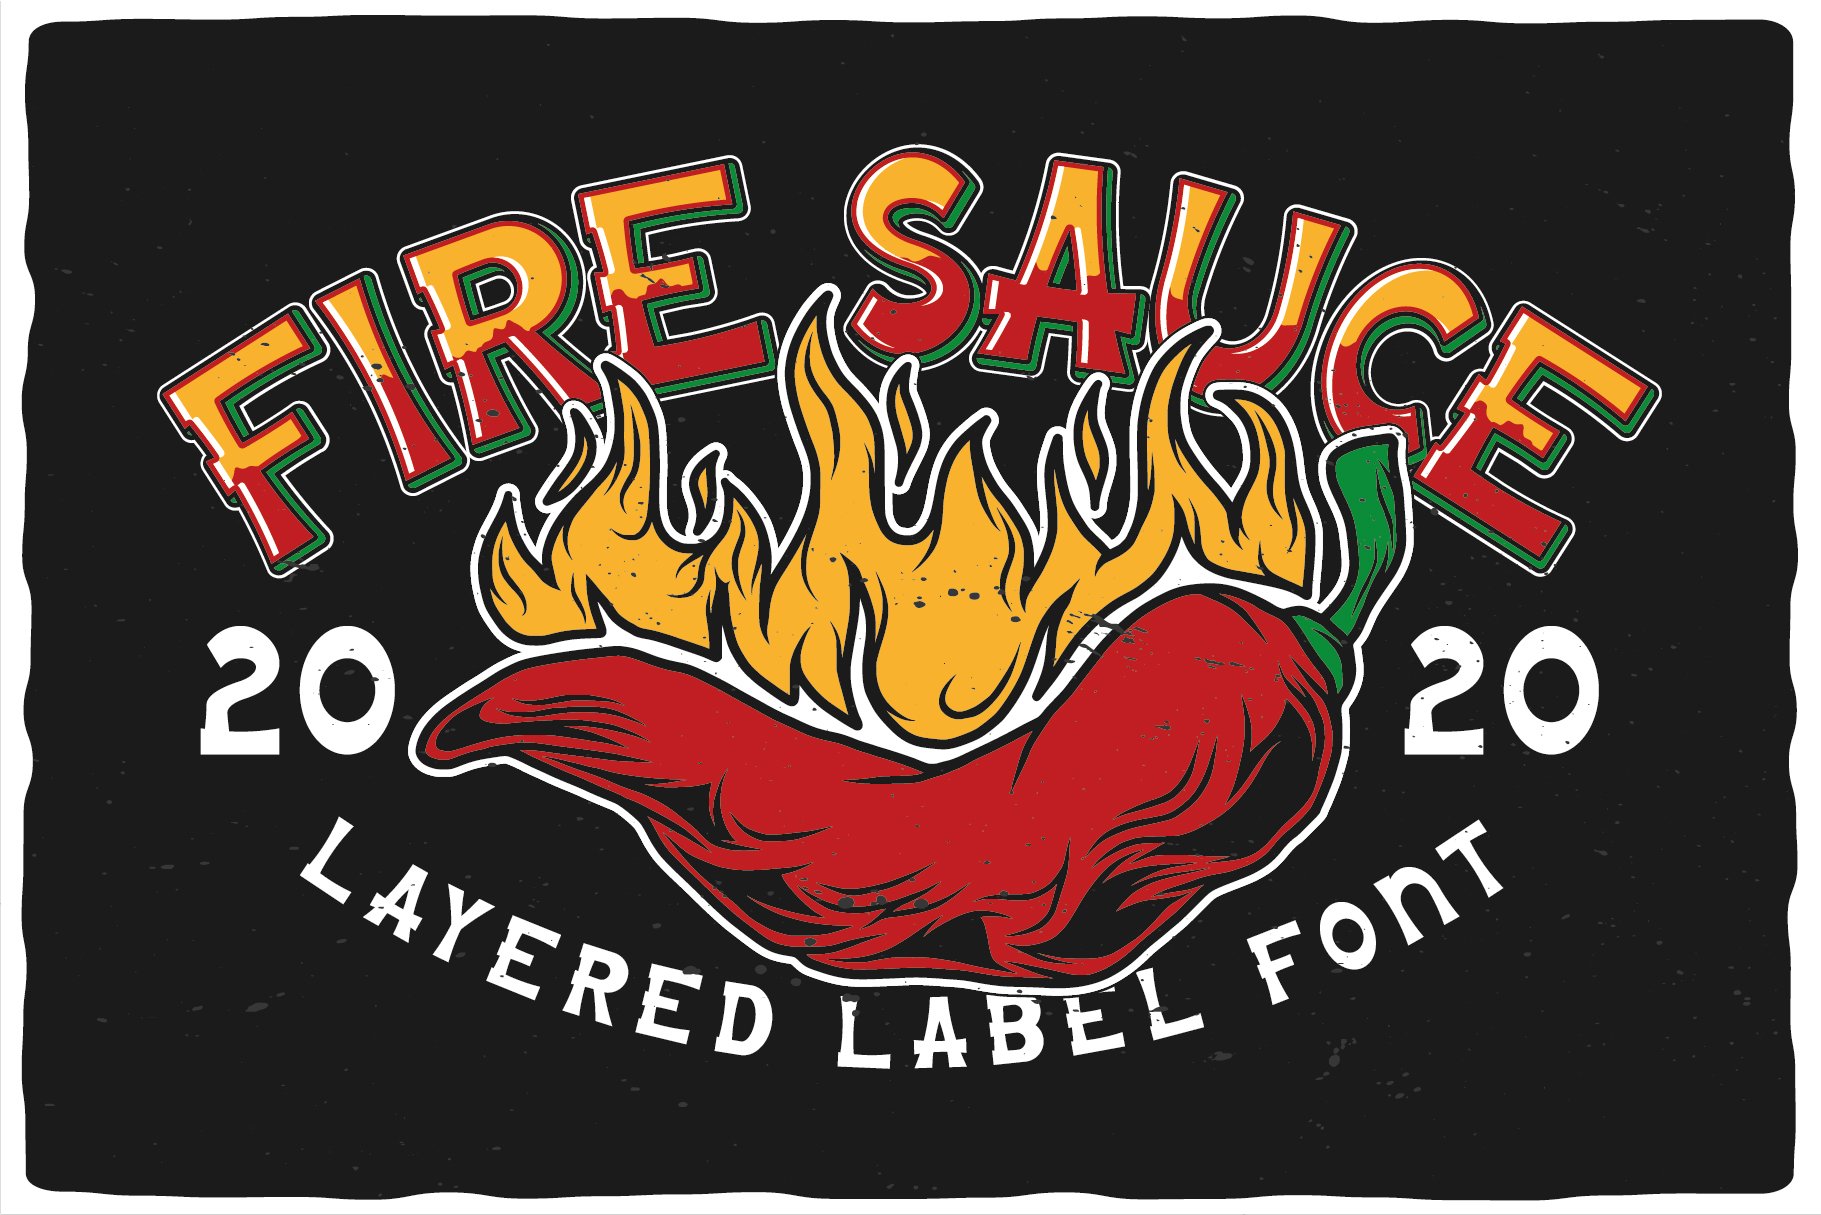 Fire Sauce Layered Font cover image.